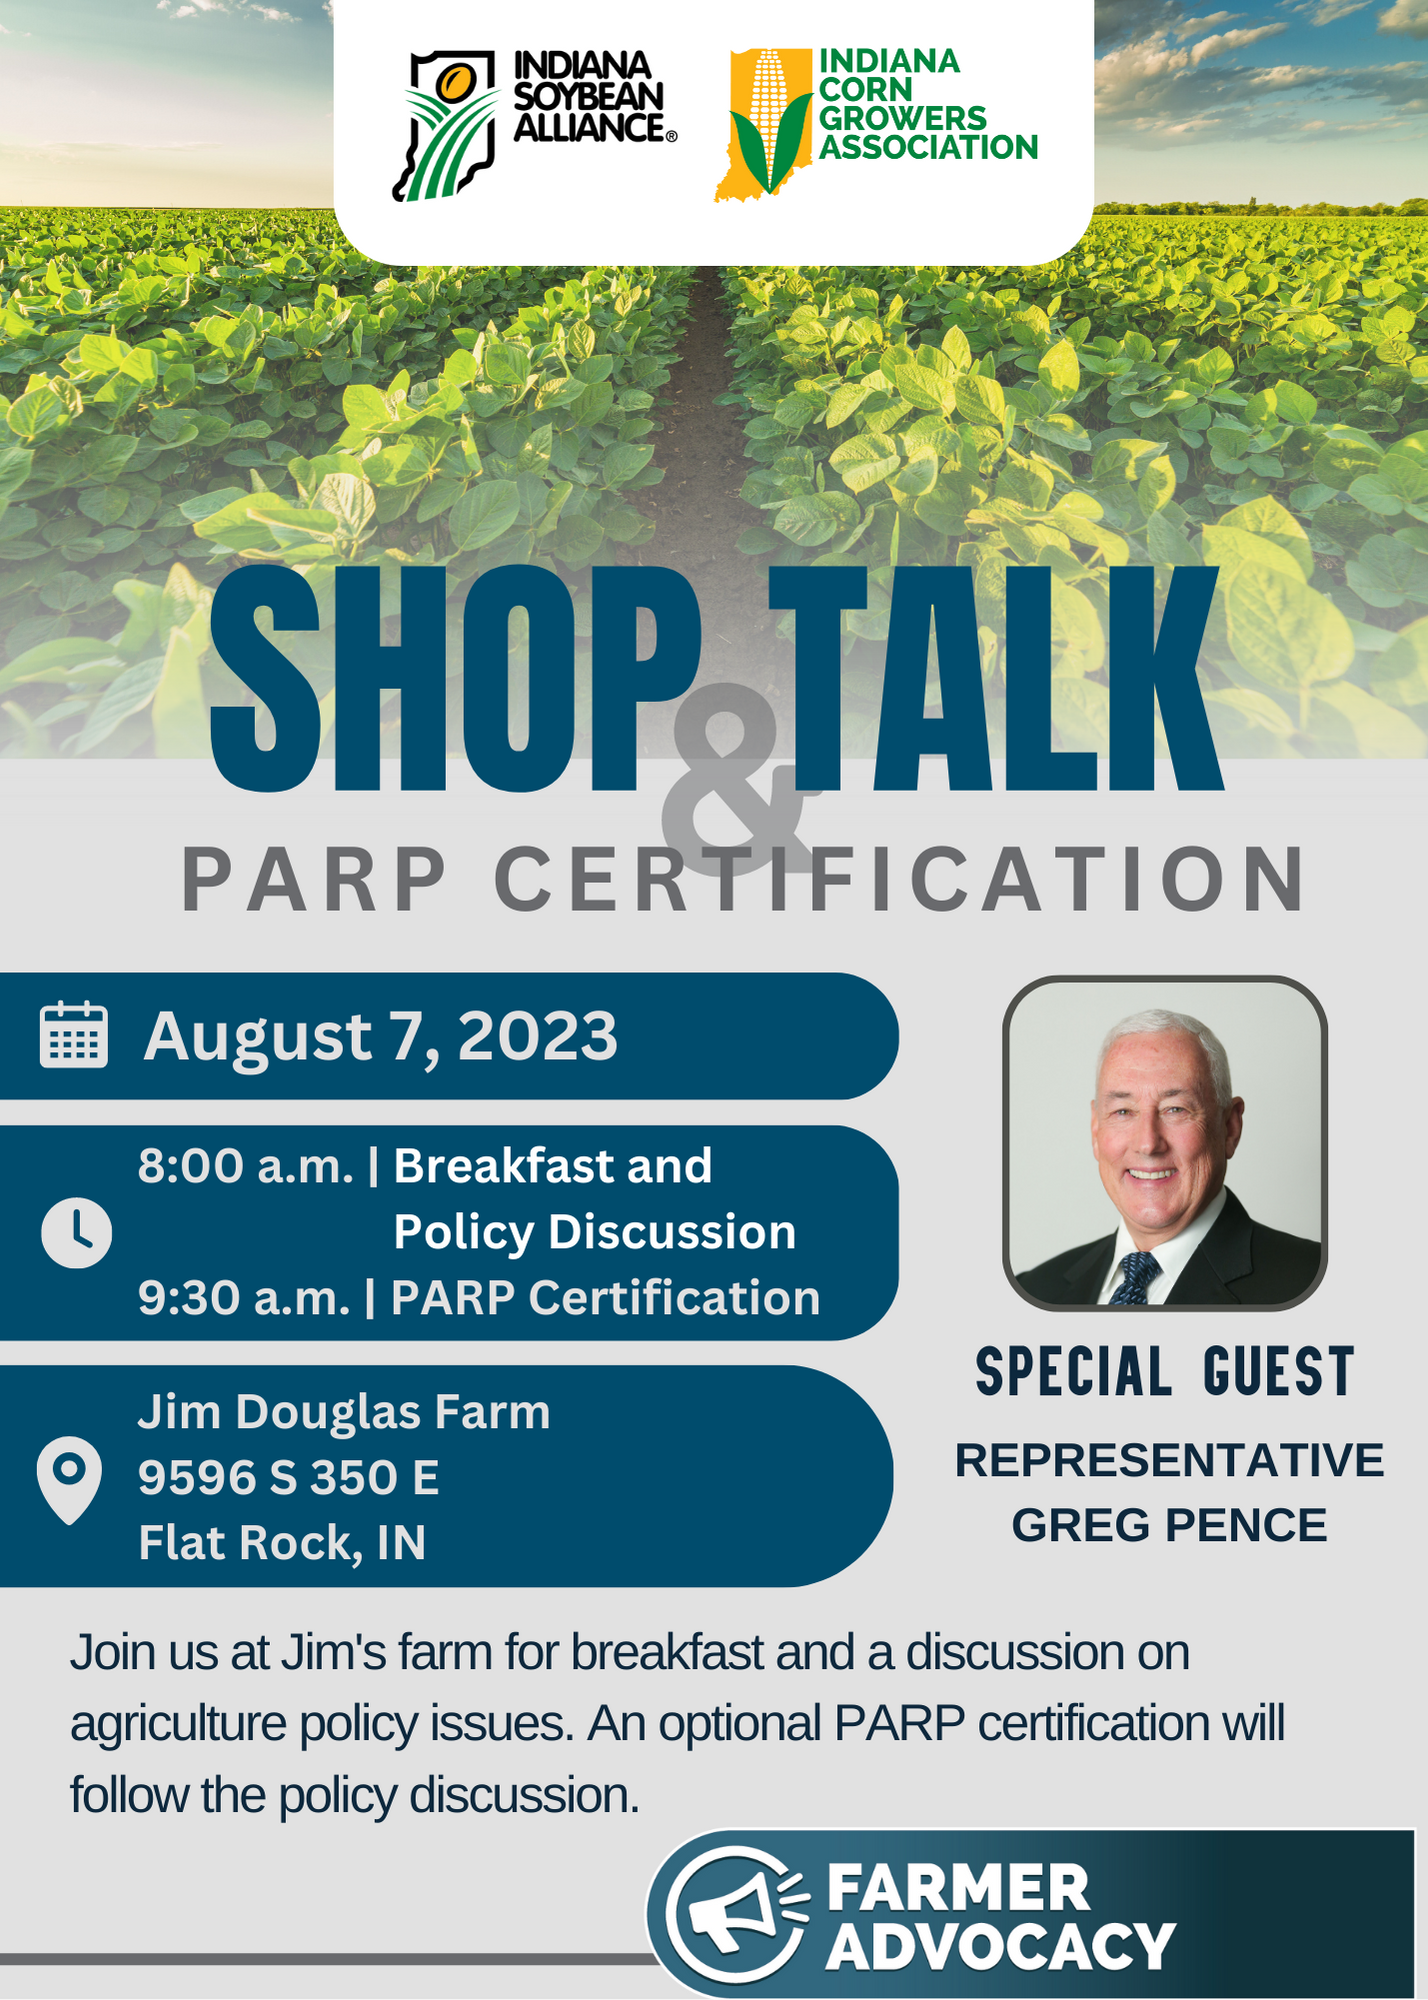 Aug 7th Shop Talk and Parp Certification